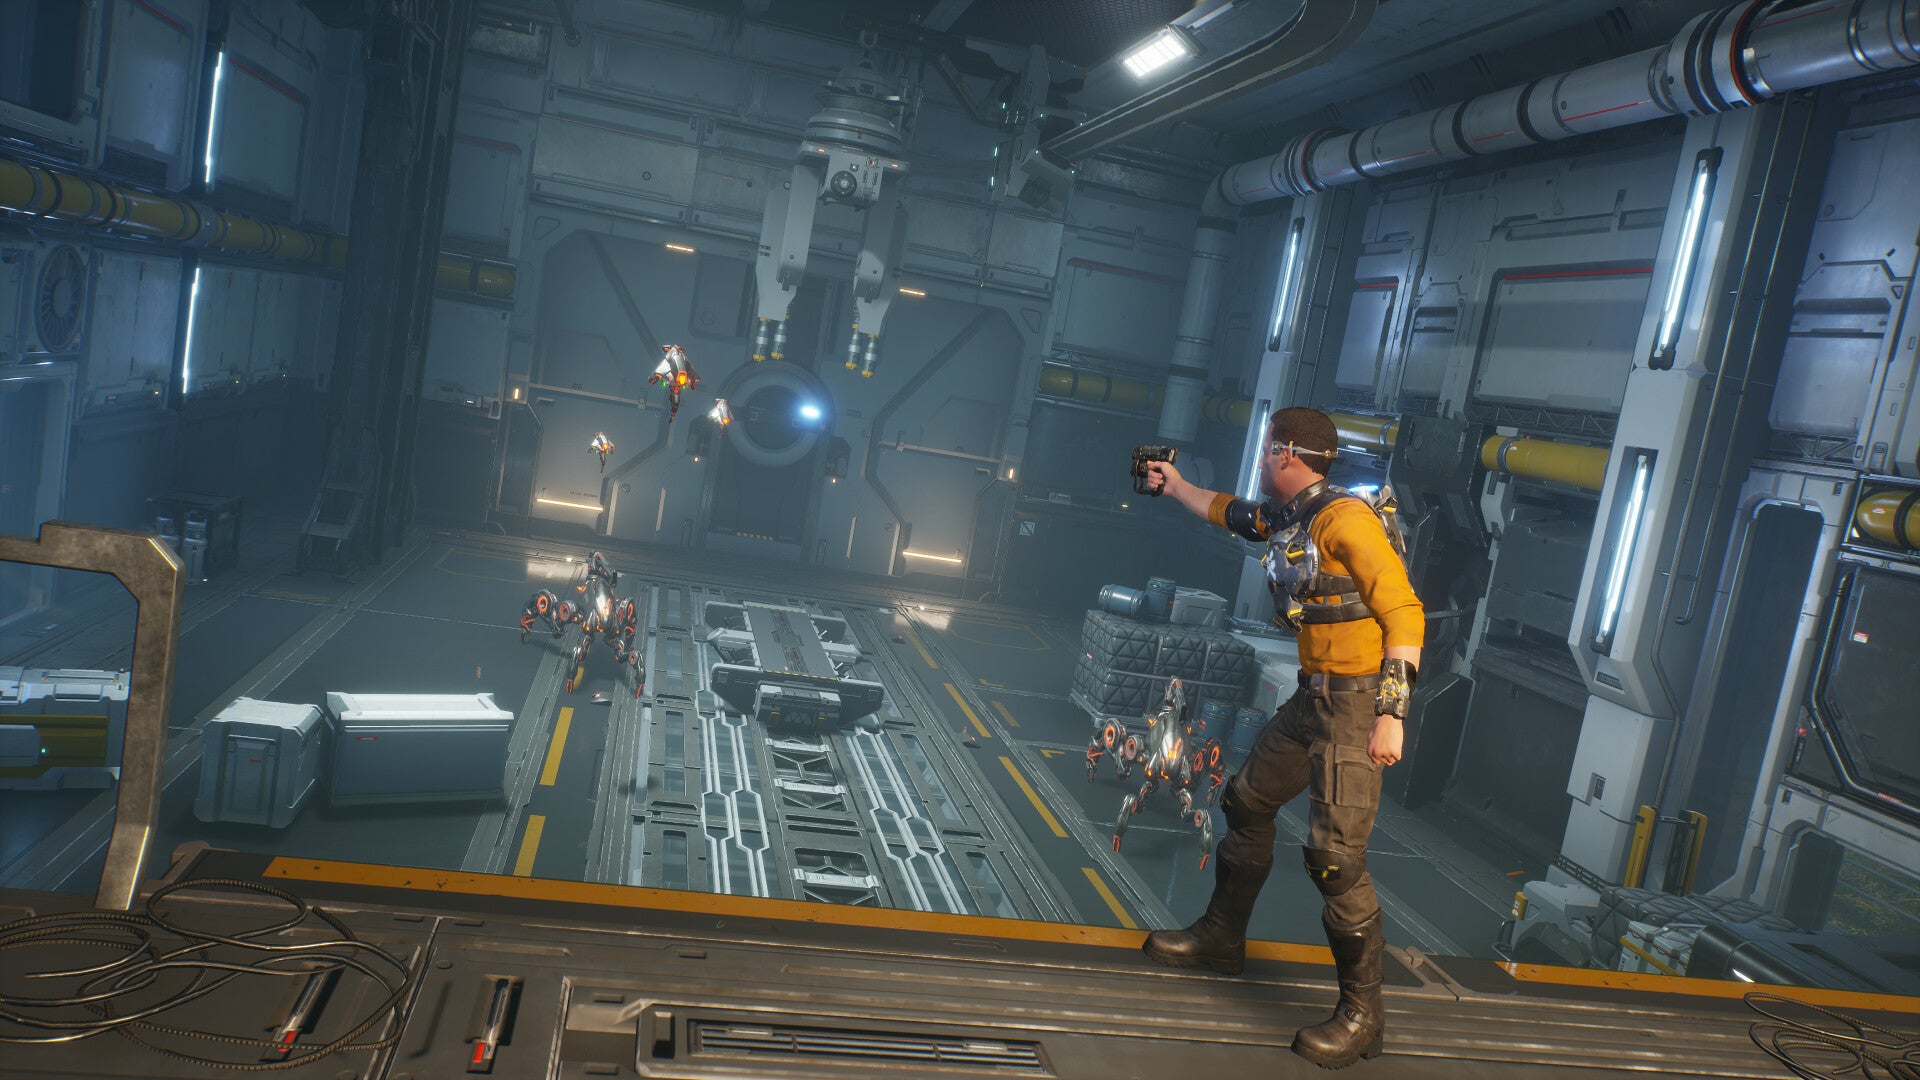 A screenshot of Outcast 2 showing protagonist Cutter Slade aiming at some robots in an indoor scifi environment.